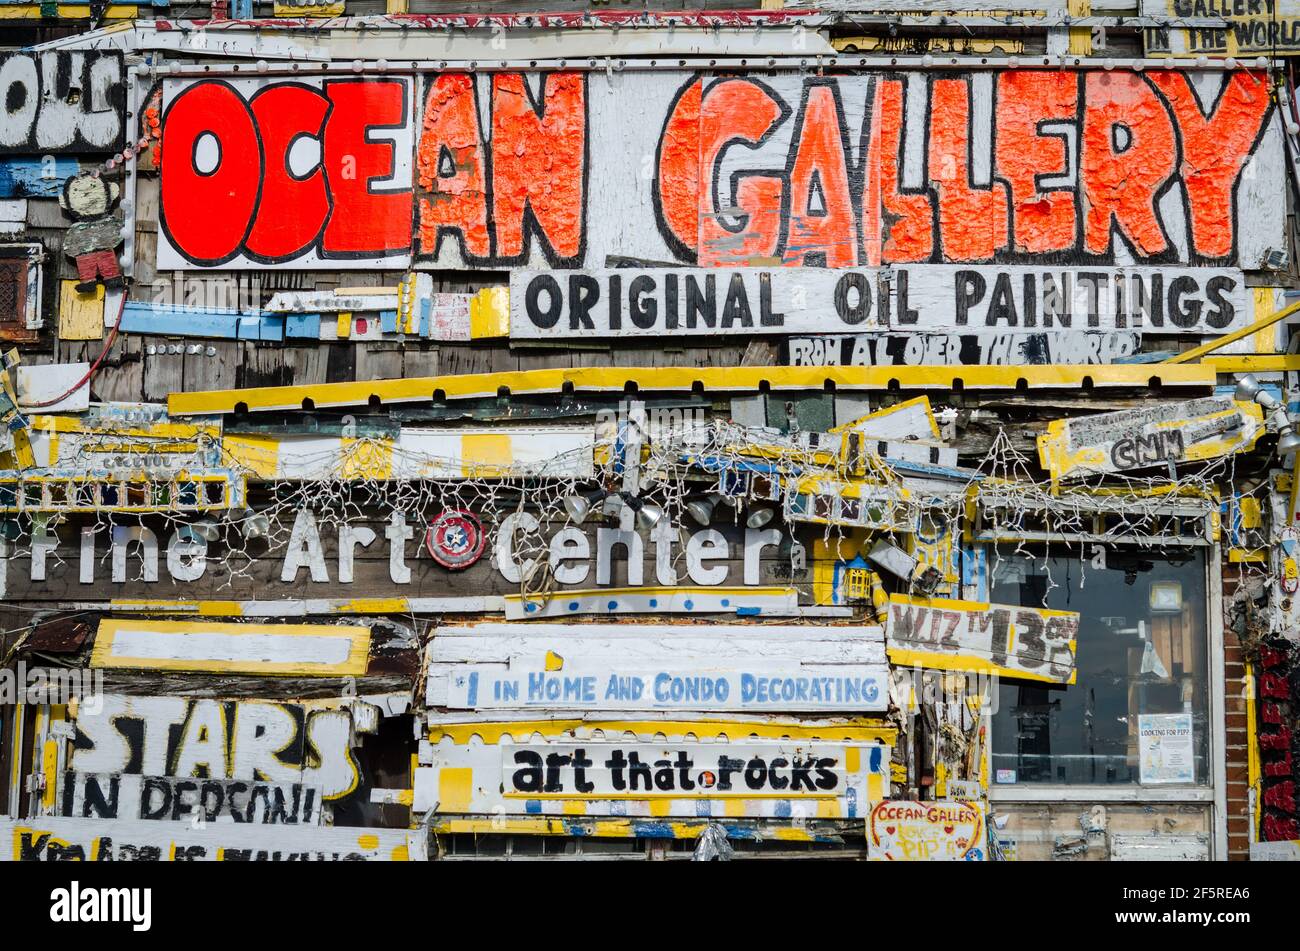 The Ocean Gallery and Art Center in Ocean City, Maryland, USA Stockfoto